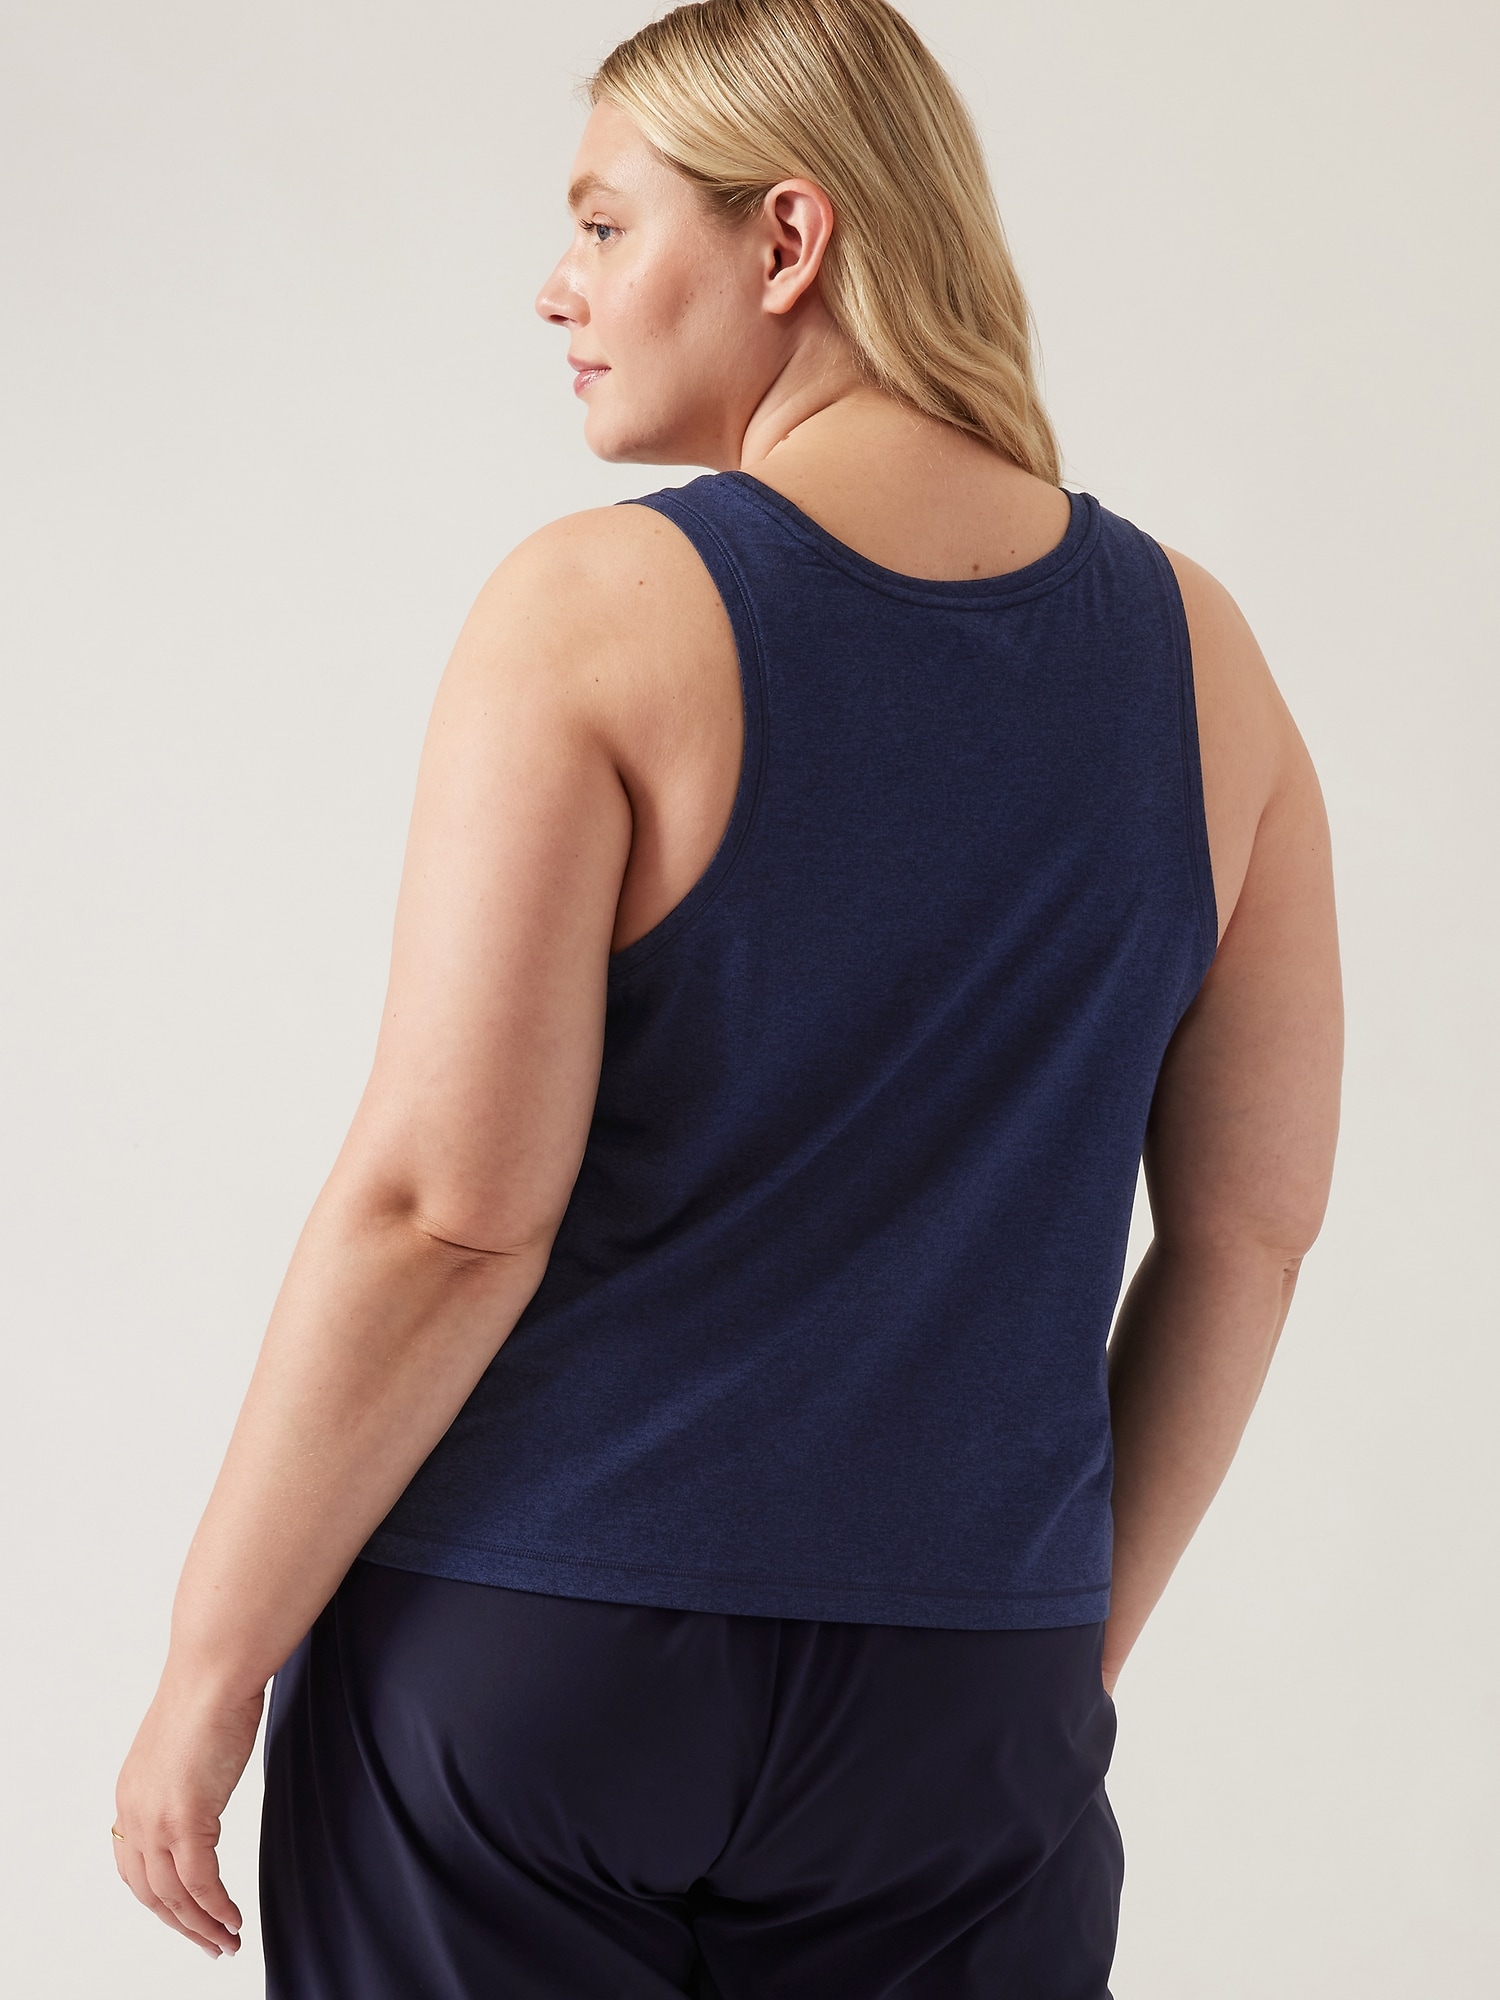 Women's Elevate Tank Top - View All